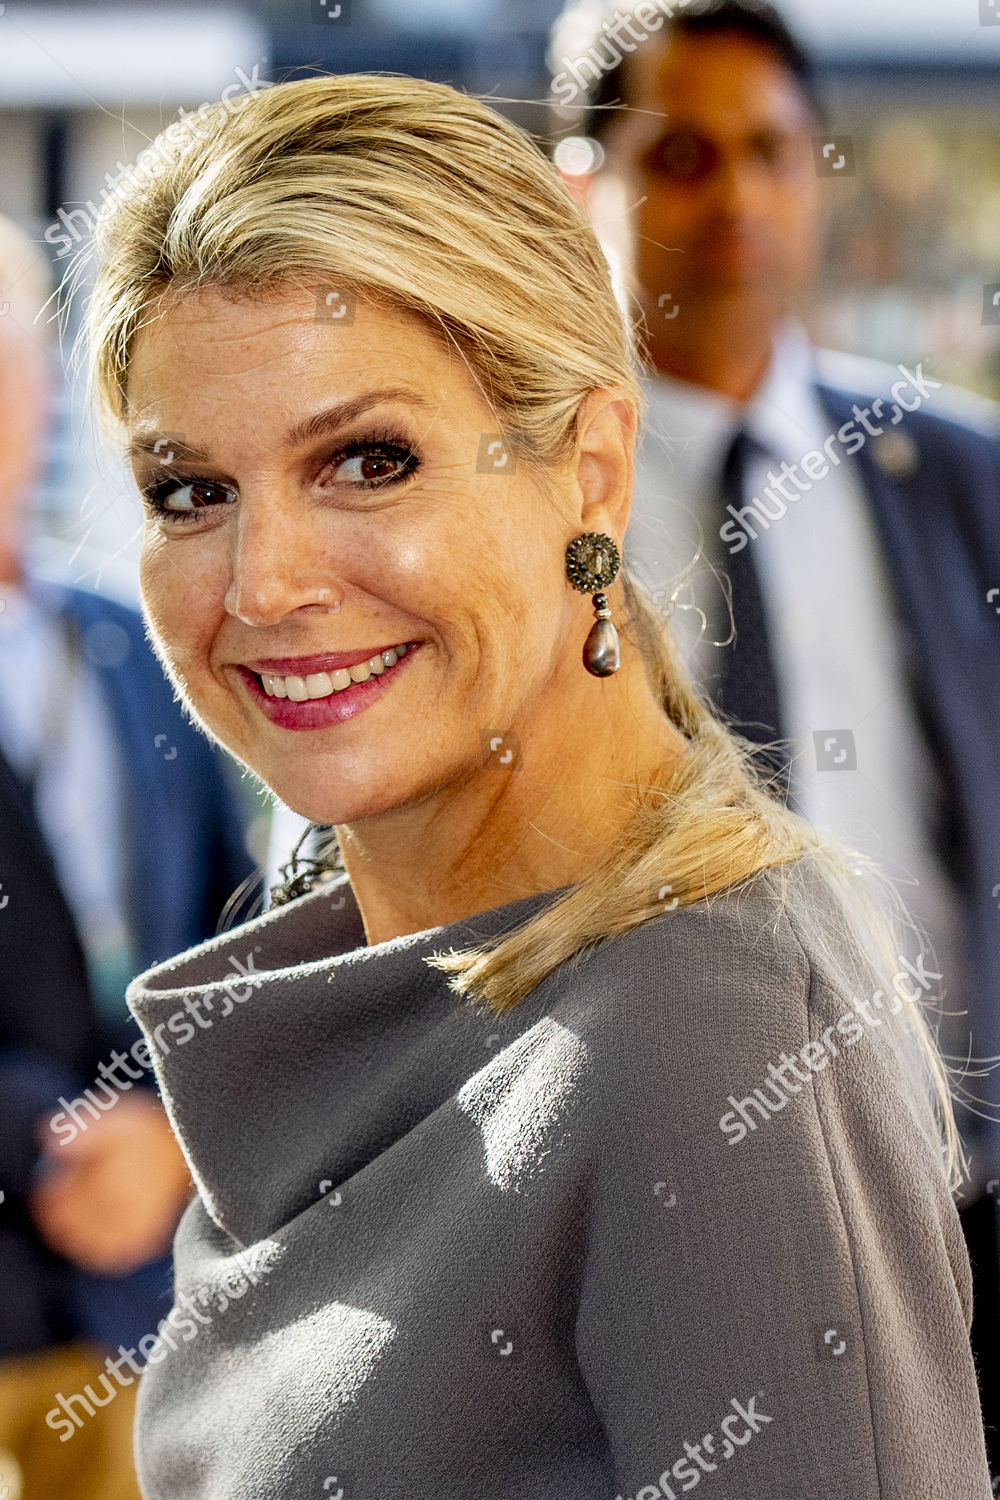 queen-maxima-arrives-at-the-annual-congress-of-mkb-netherlands-the-hague-the-netherlands-shutterstock-editorial-9919554n.jpg